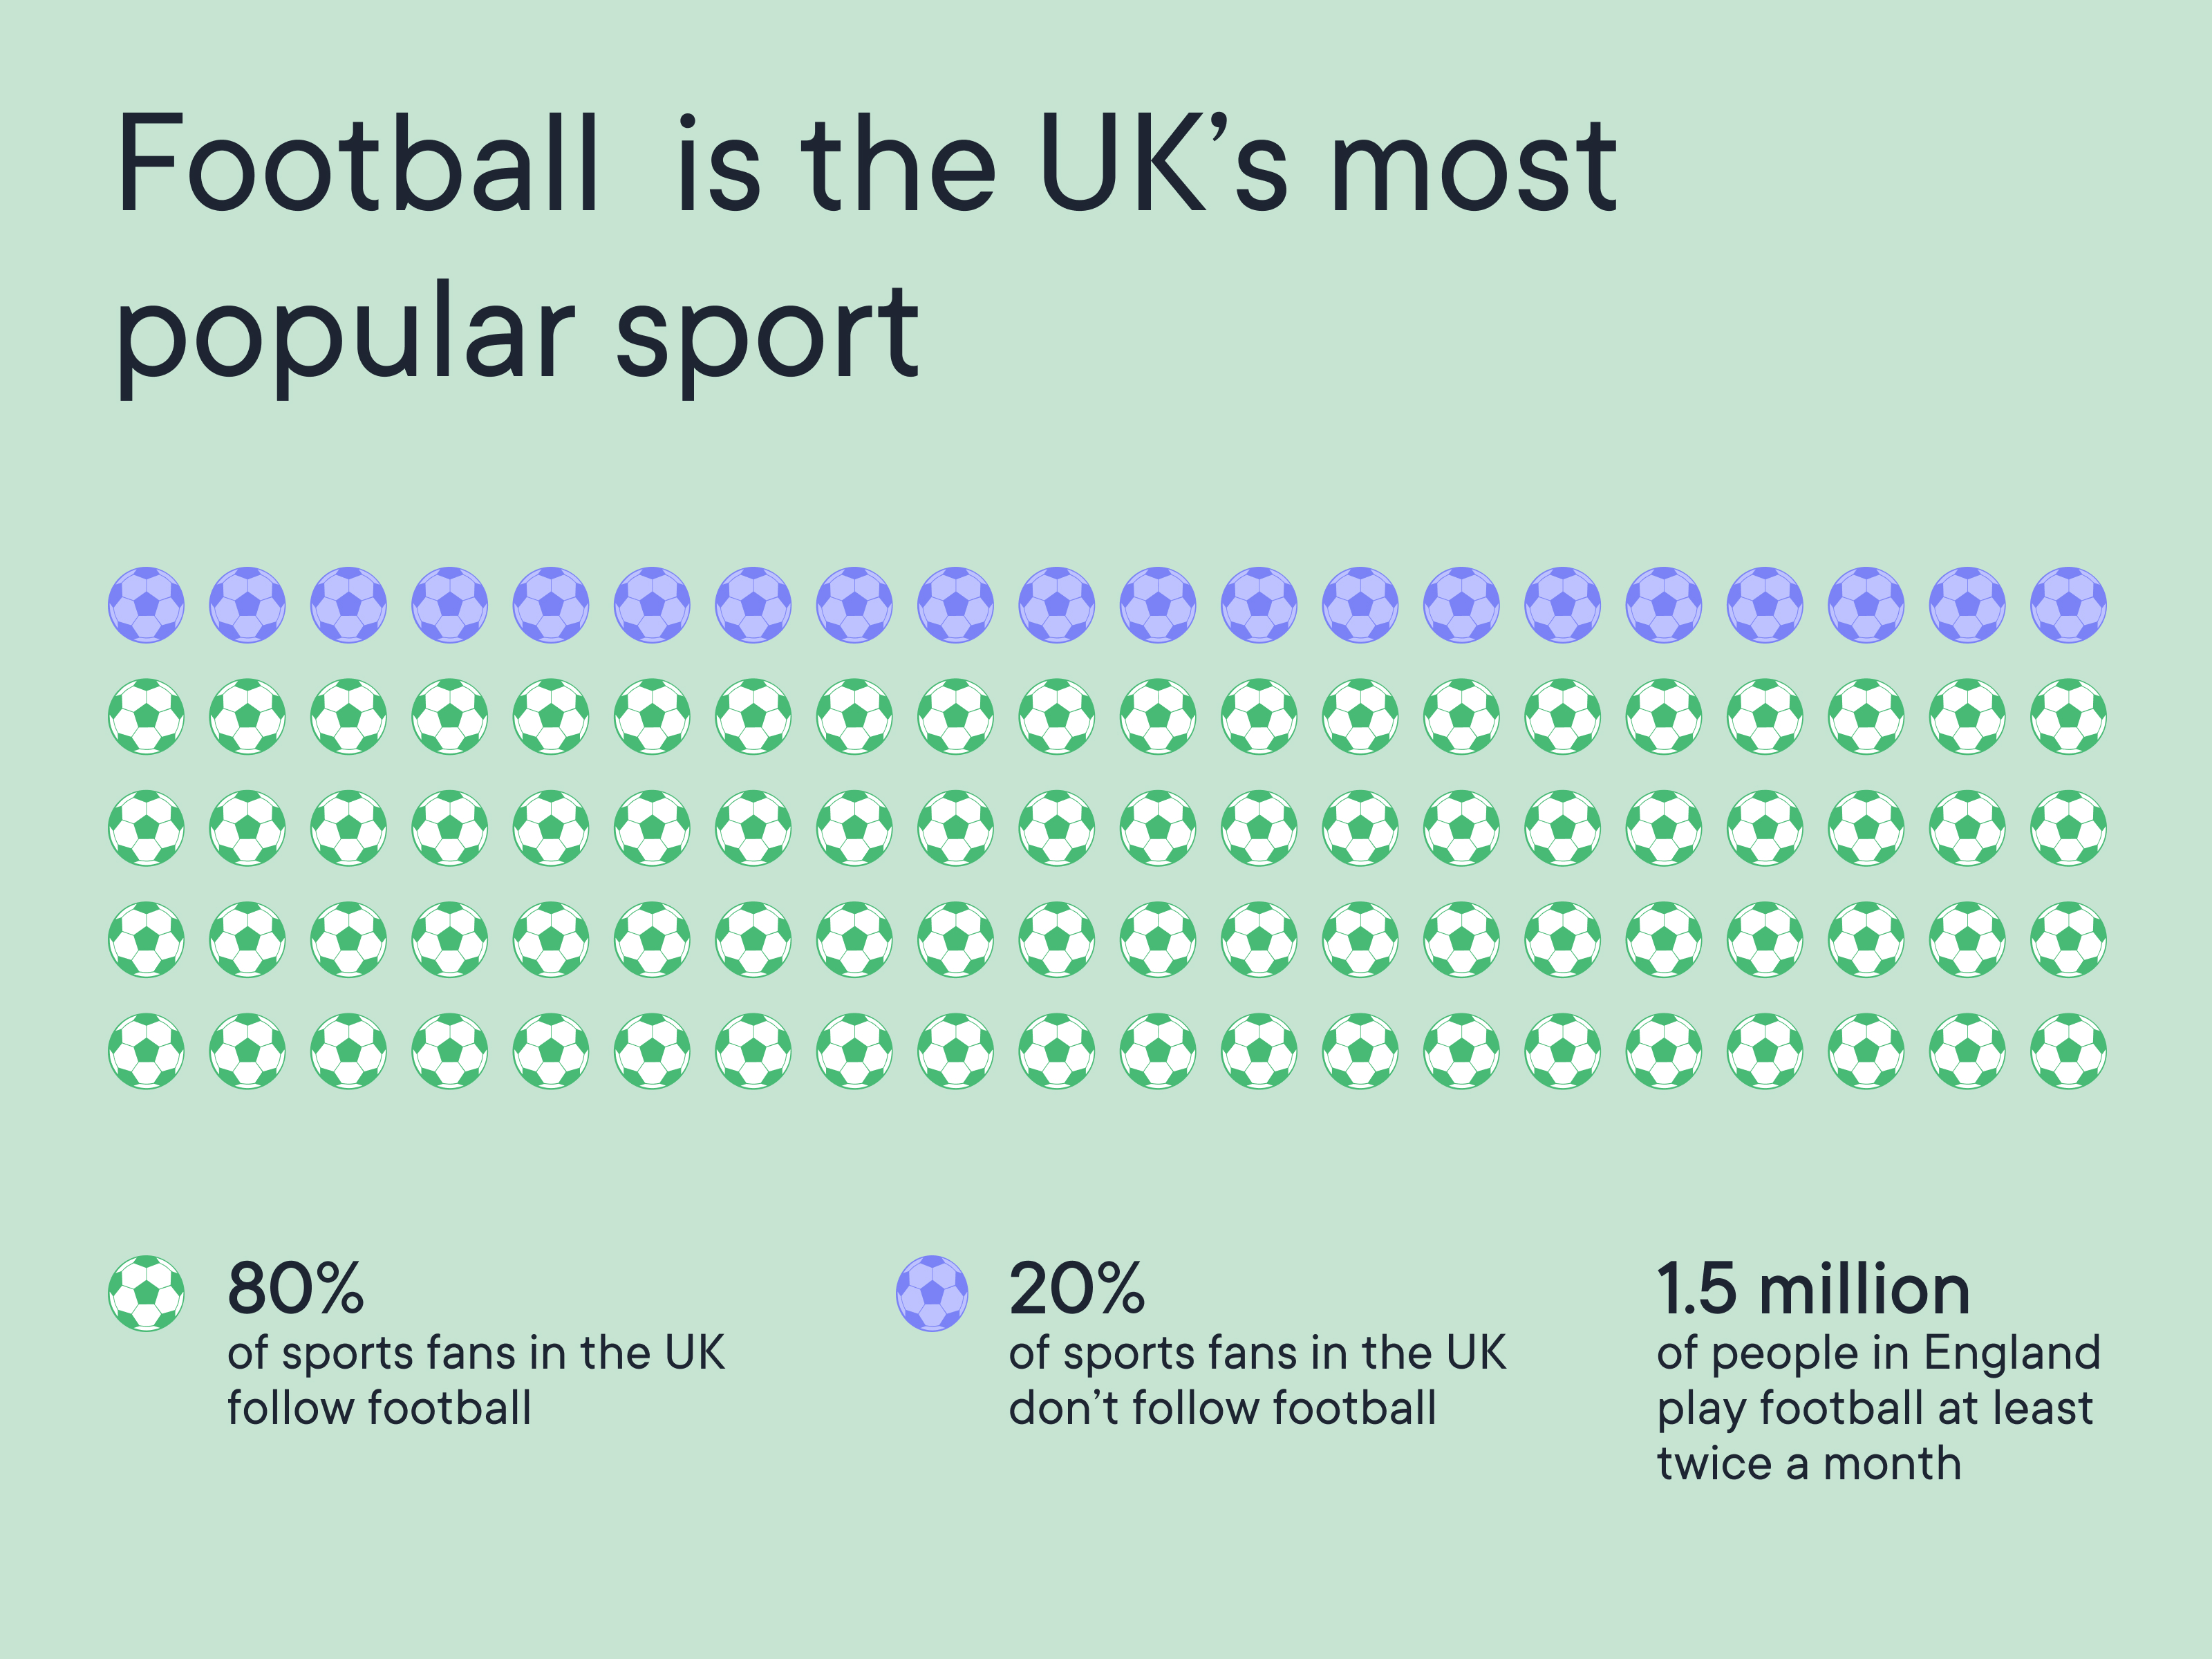 Football is the UK's most pupular sport. 80% of sports fans in the UK follow football.